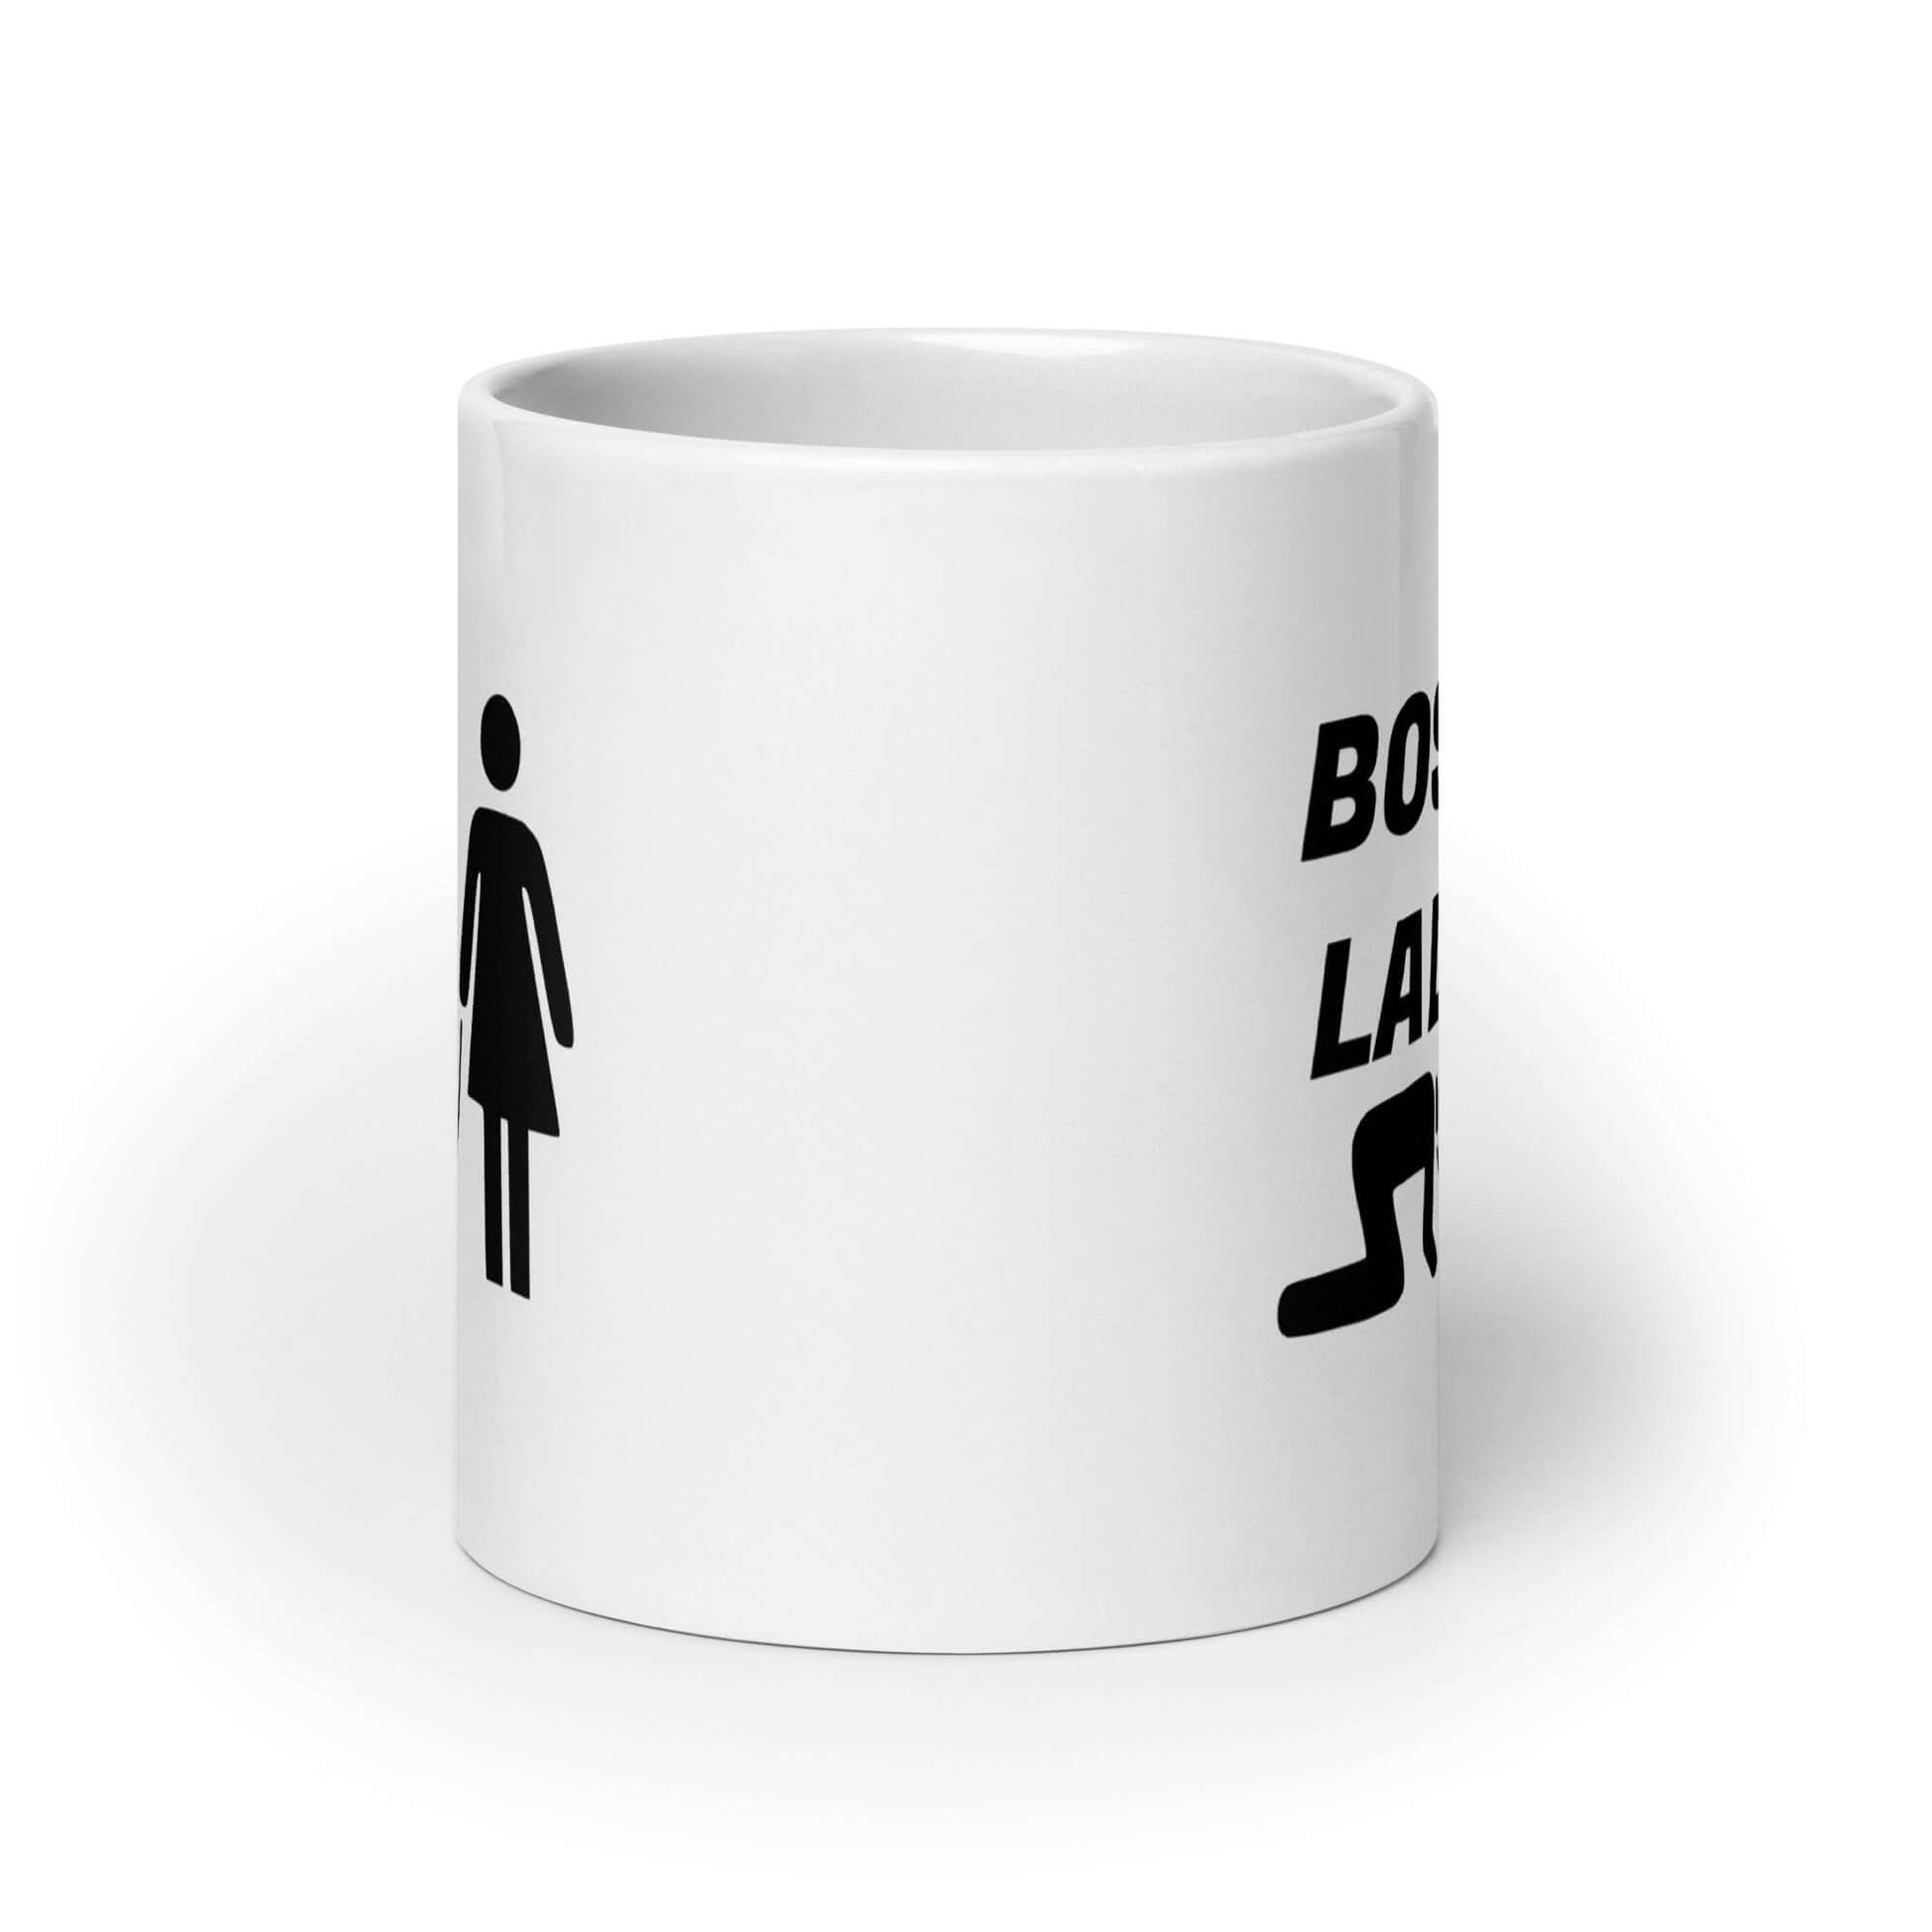 White ceramic mug with graphic of collared and leashed man on his hands and knees being led by a woman and the words Boss lady printed on both sides.